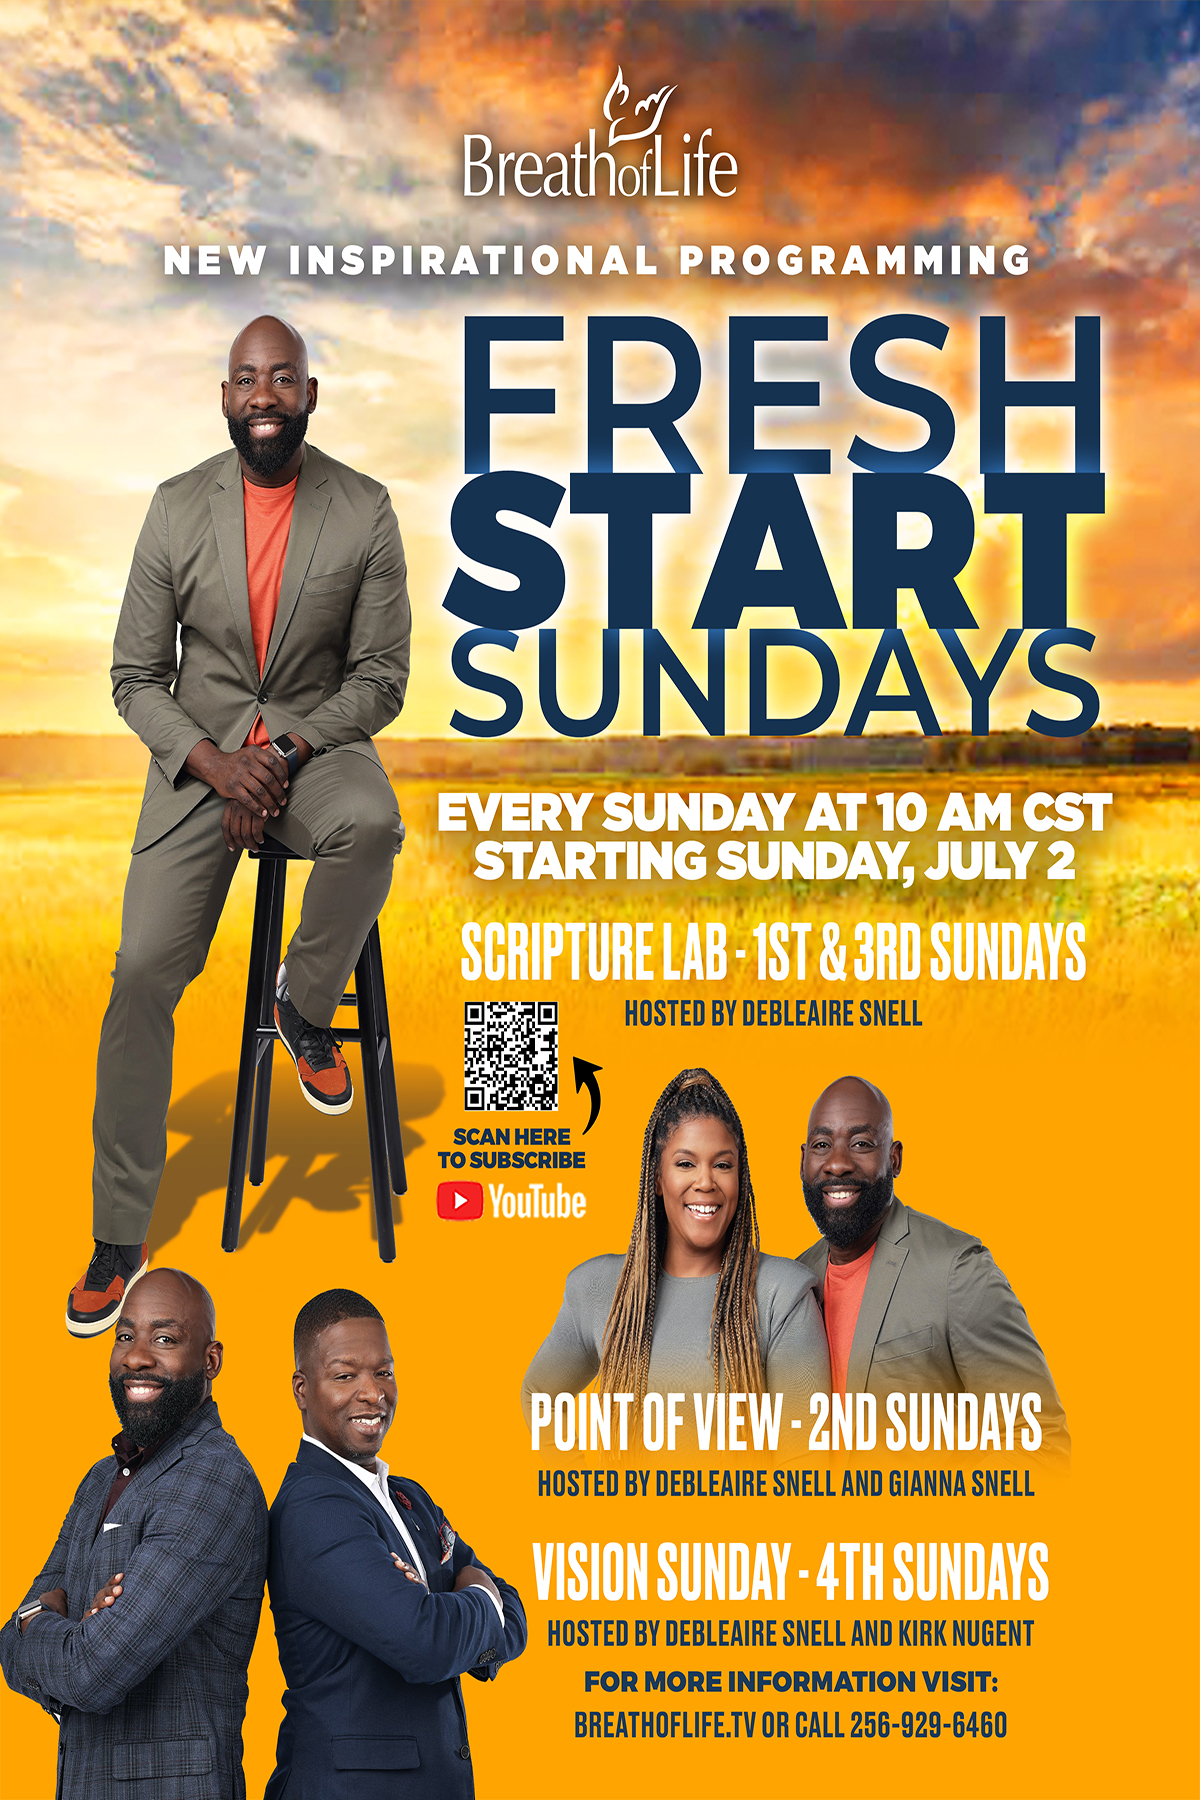 A promotional photo titled "Fresh Start Sundays," with pictures of a black man, seated on the left, headshots of the same man and a black woman in the middle, and on the bottom left a photo of the black man and another black man standing, with only their torsos showing. The men in the photo are wearing suits and the woman is wearing a dress.